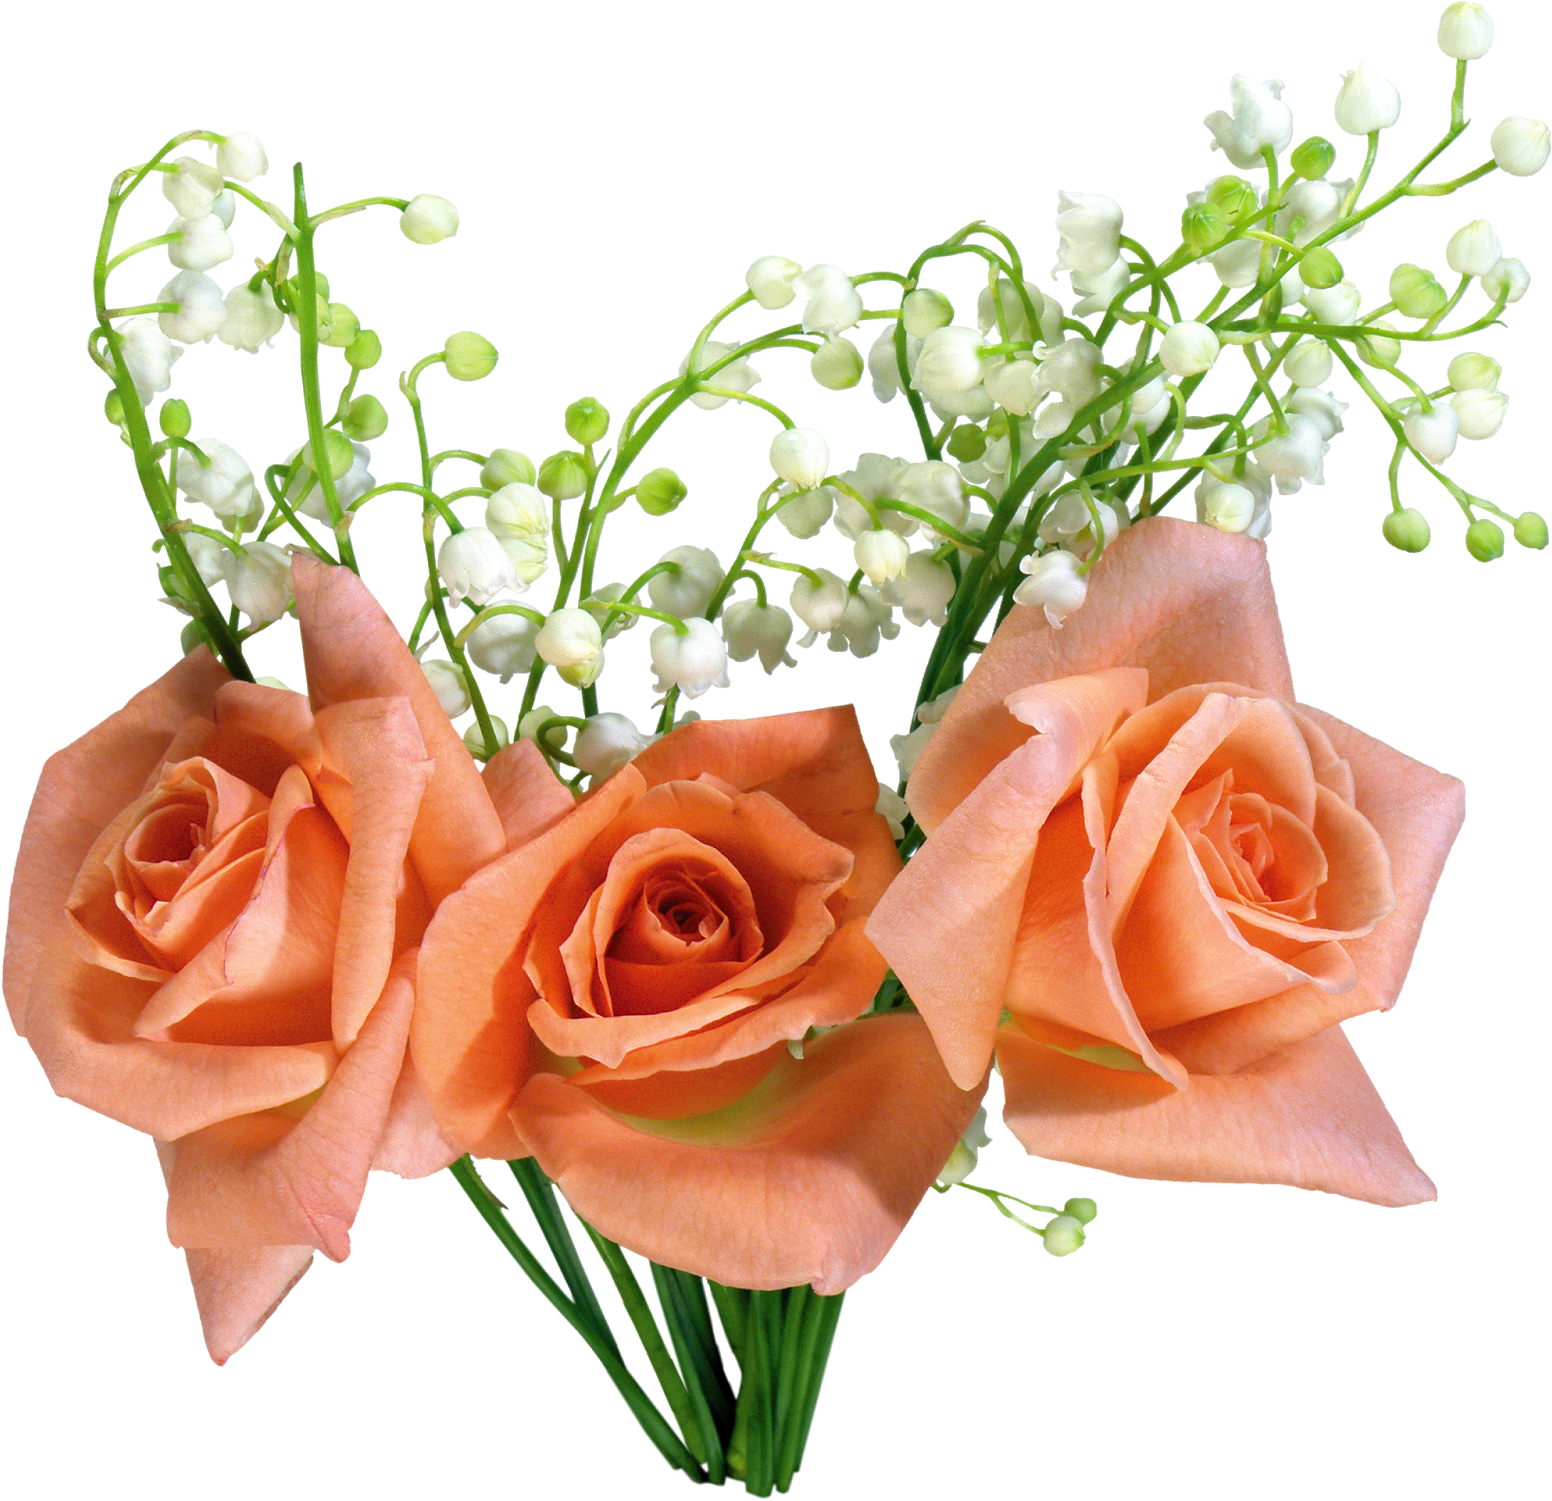 Roses With Lily Of The Valley - Flower (1600x1527)